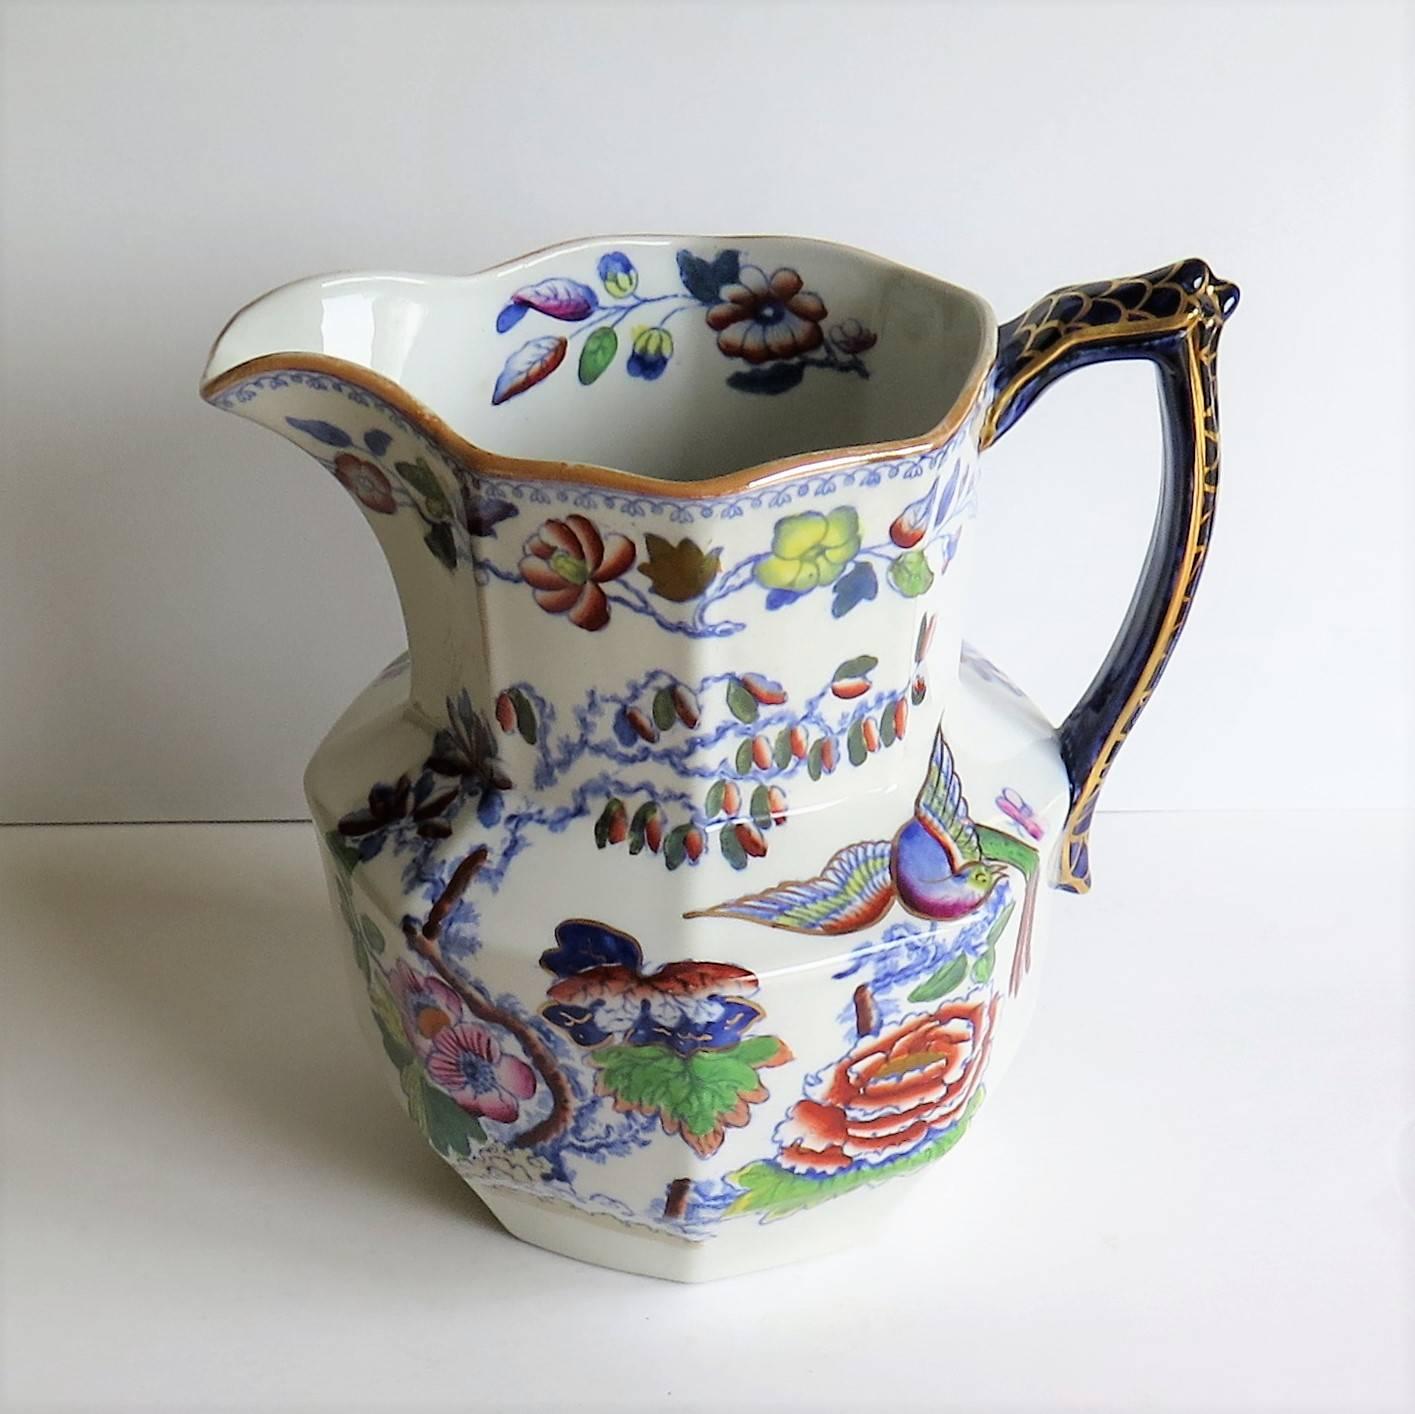 English Large Mason's Ironstone Jug or Pitcher in Flying Bird Pattern, late 19th Century